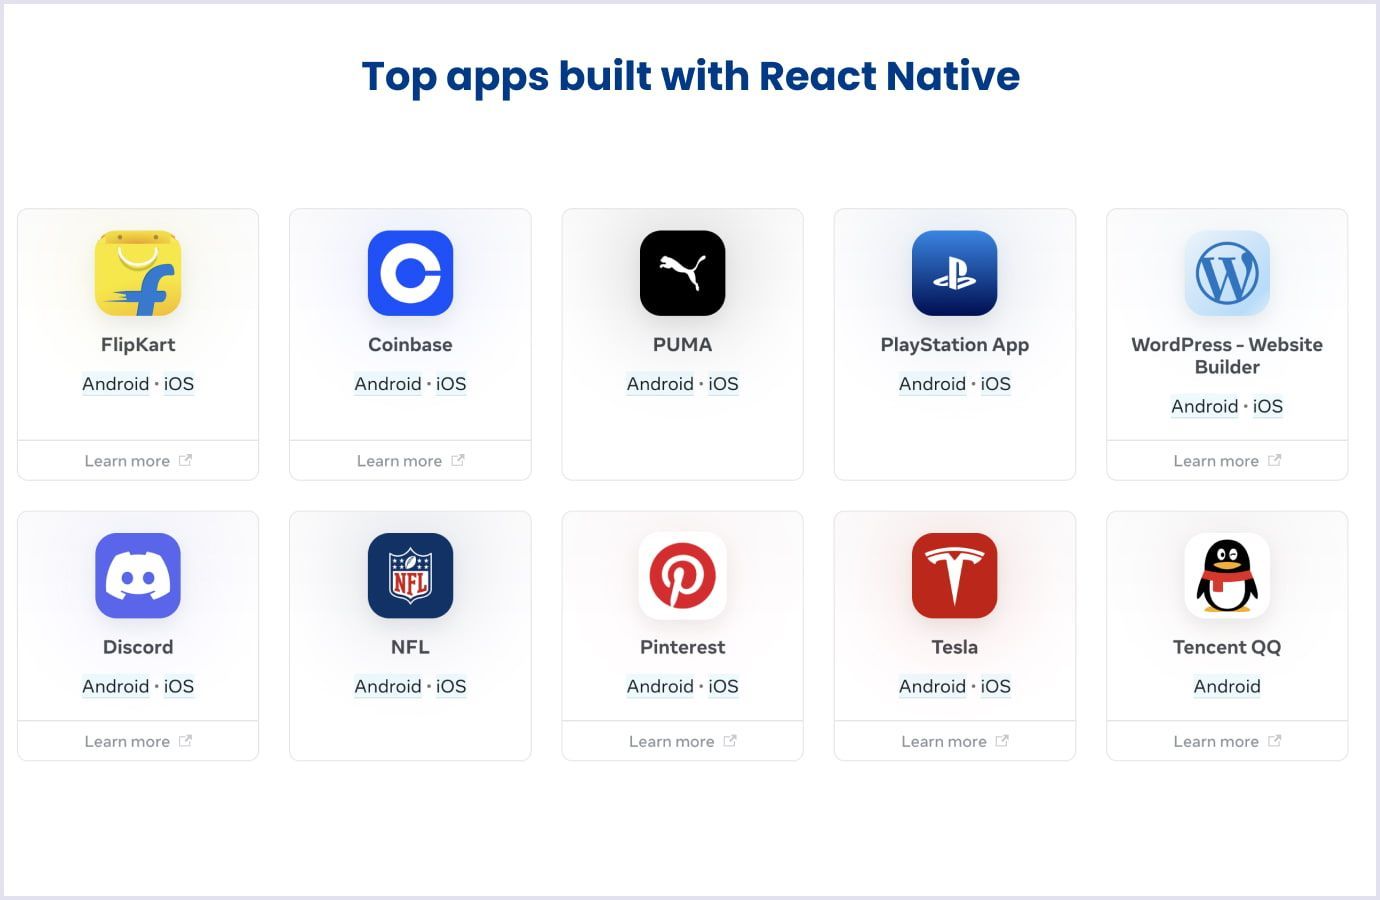 Top products built with React Native